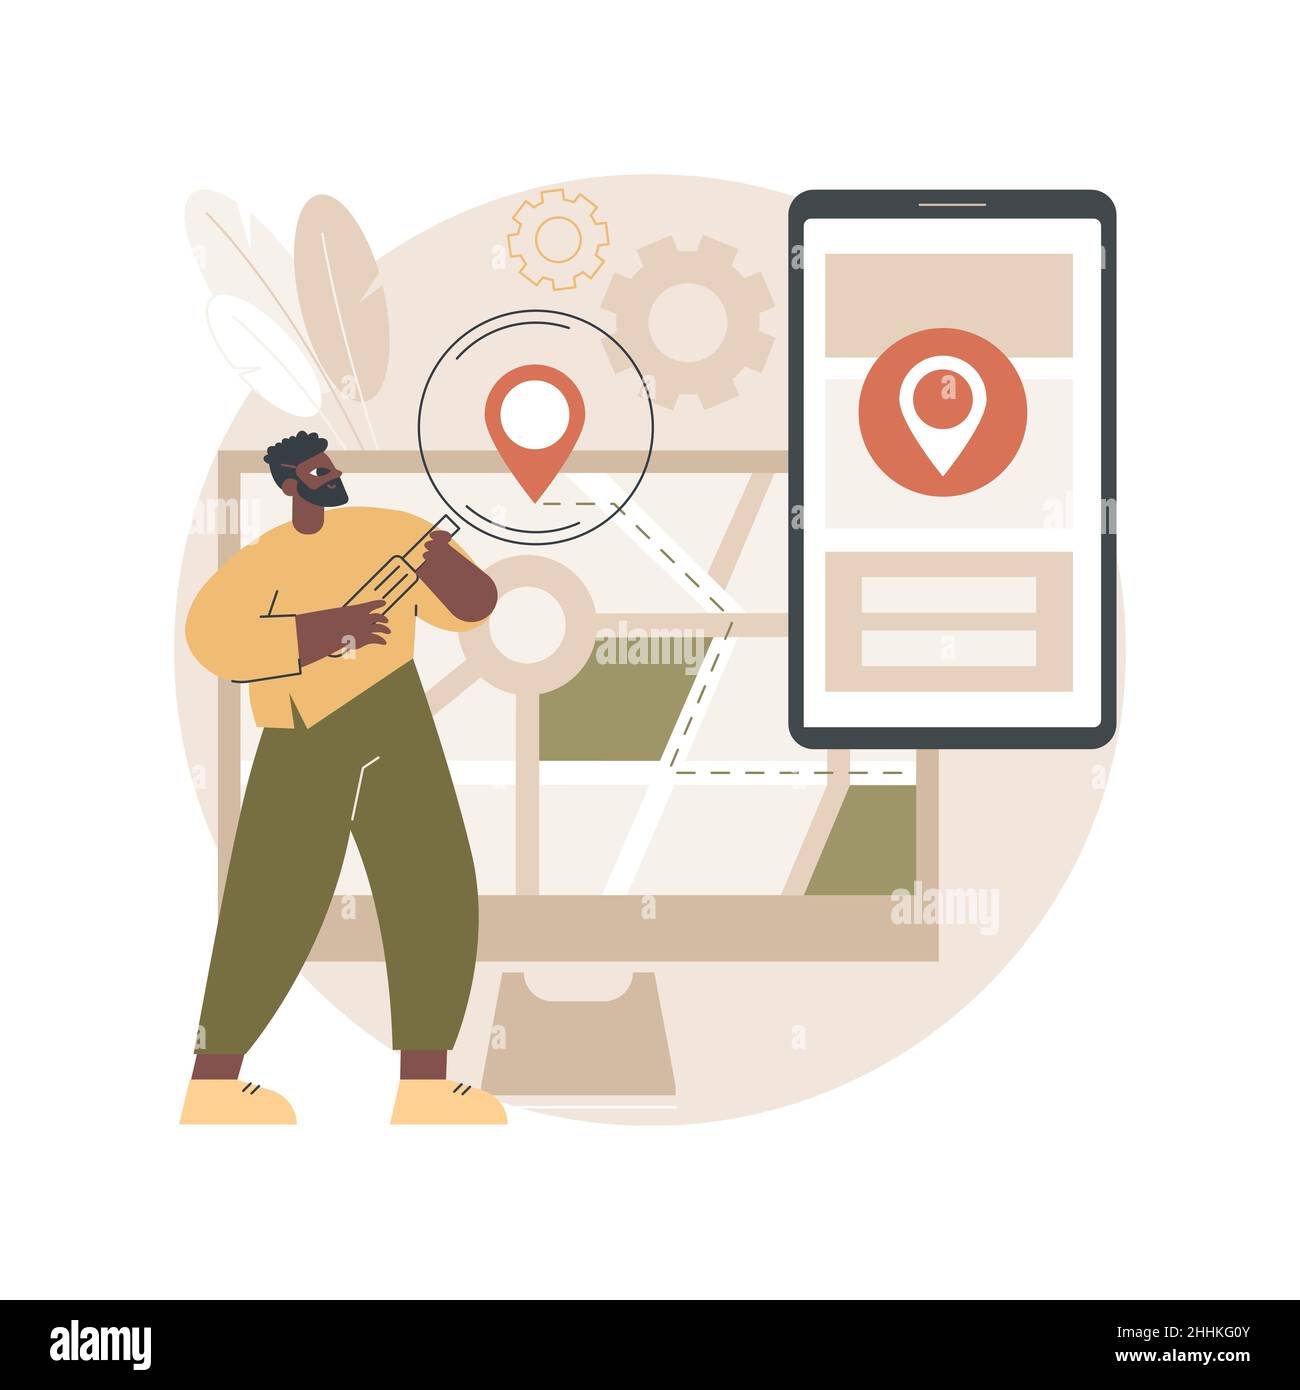 Cross-device tracking abstract concept vector illustration. Multi device use and reports, one user profile, cross-device tracking capability, analytics, device identification abstract metaphor. Stock Vector